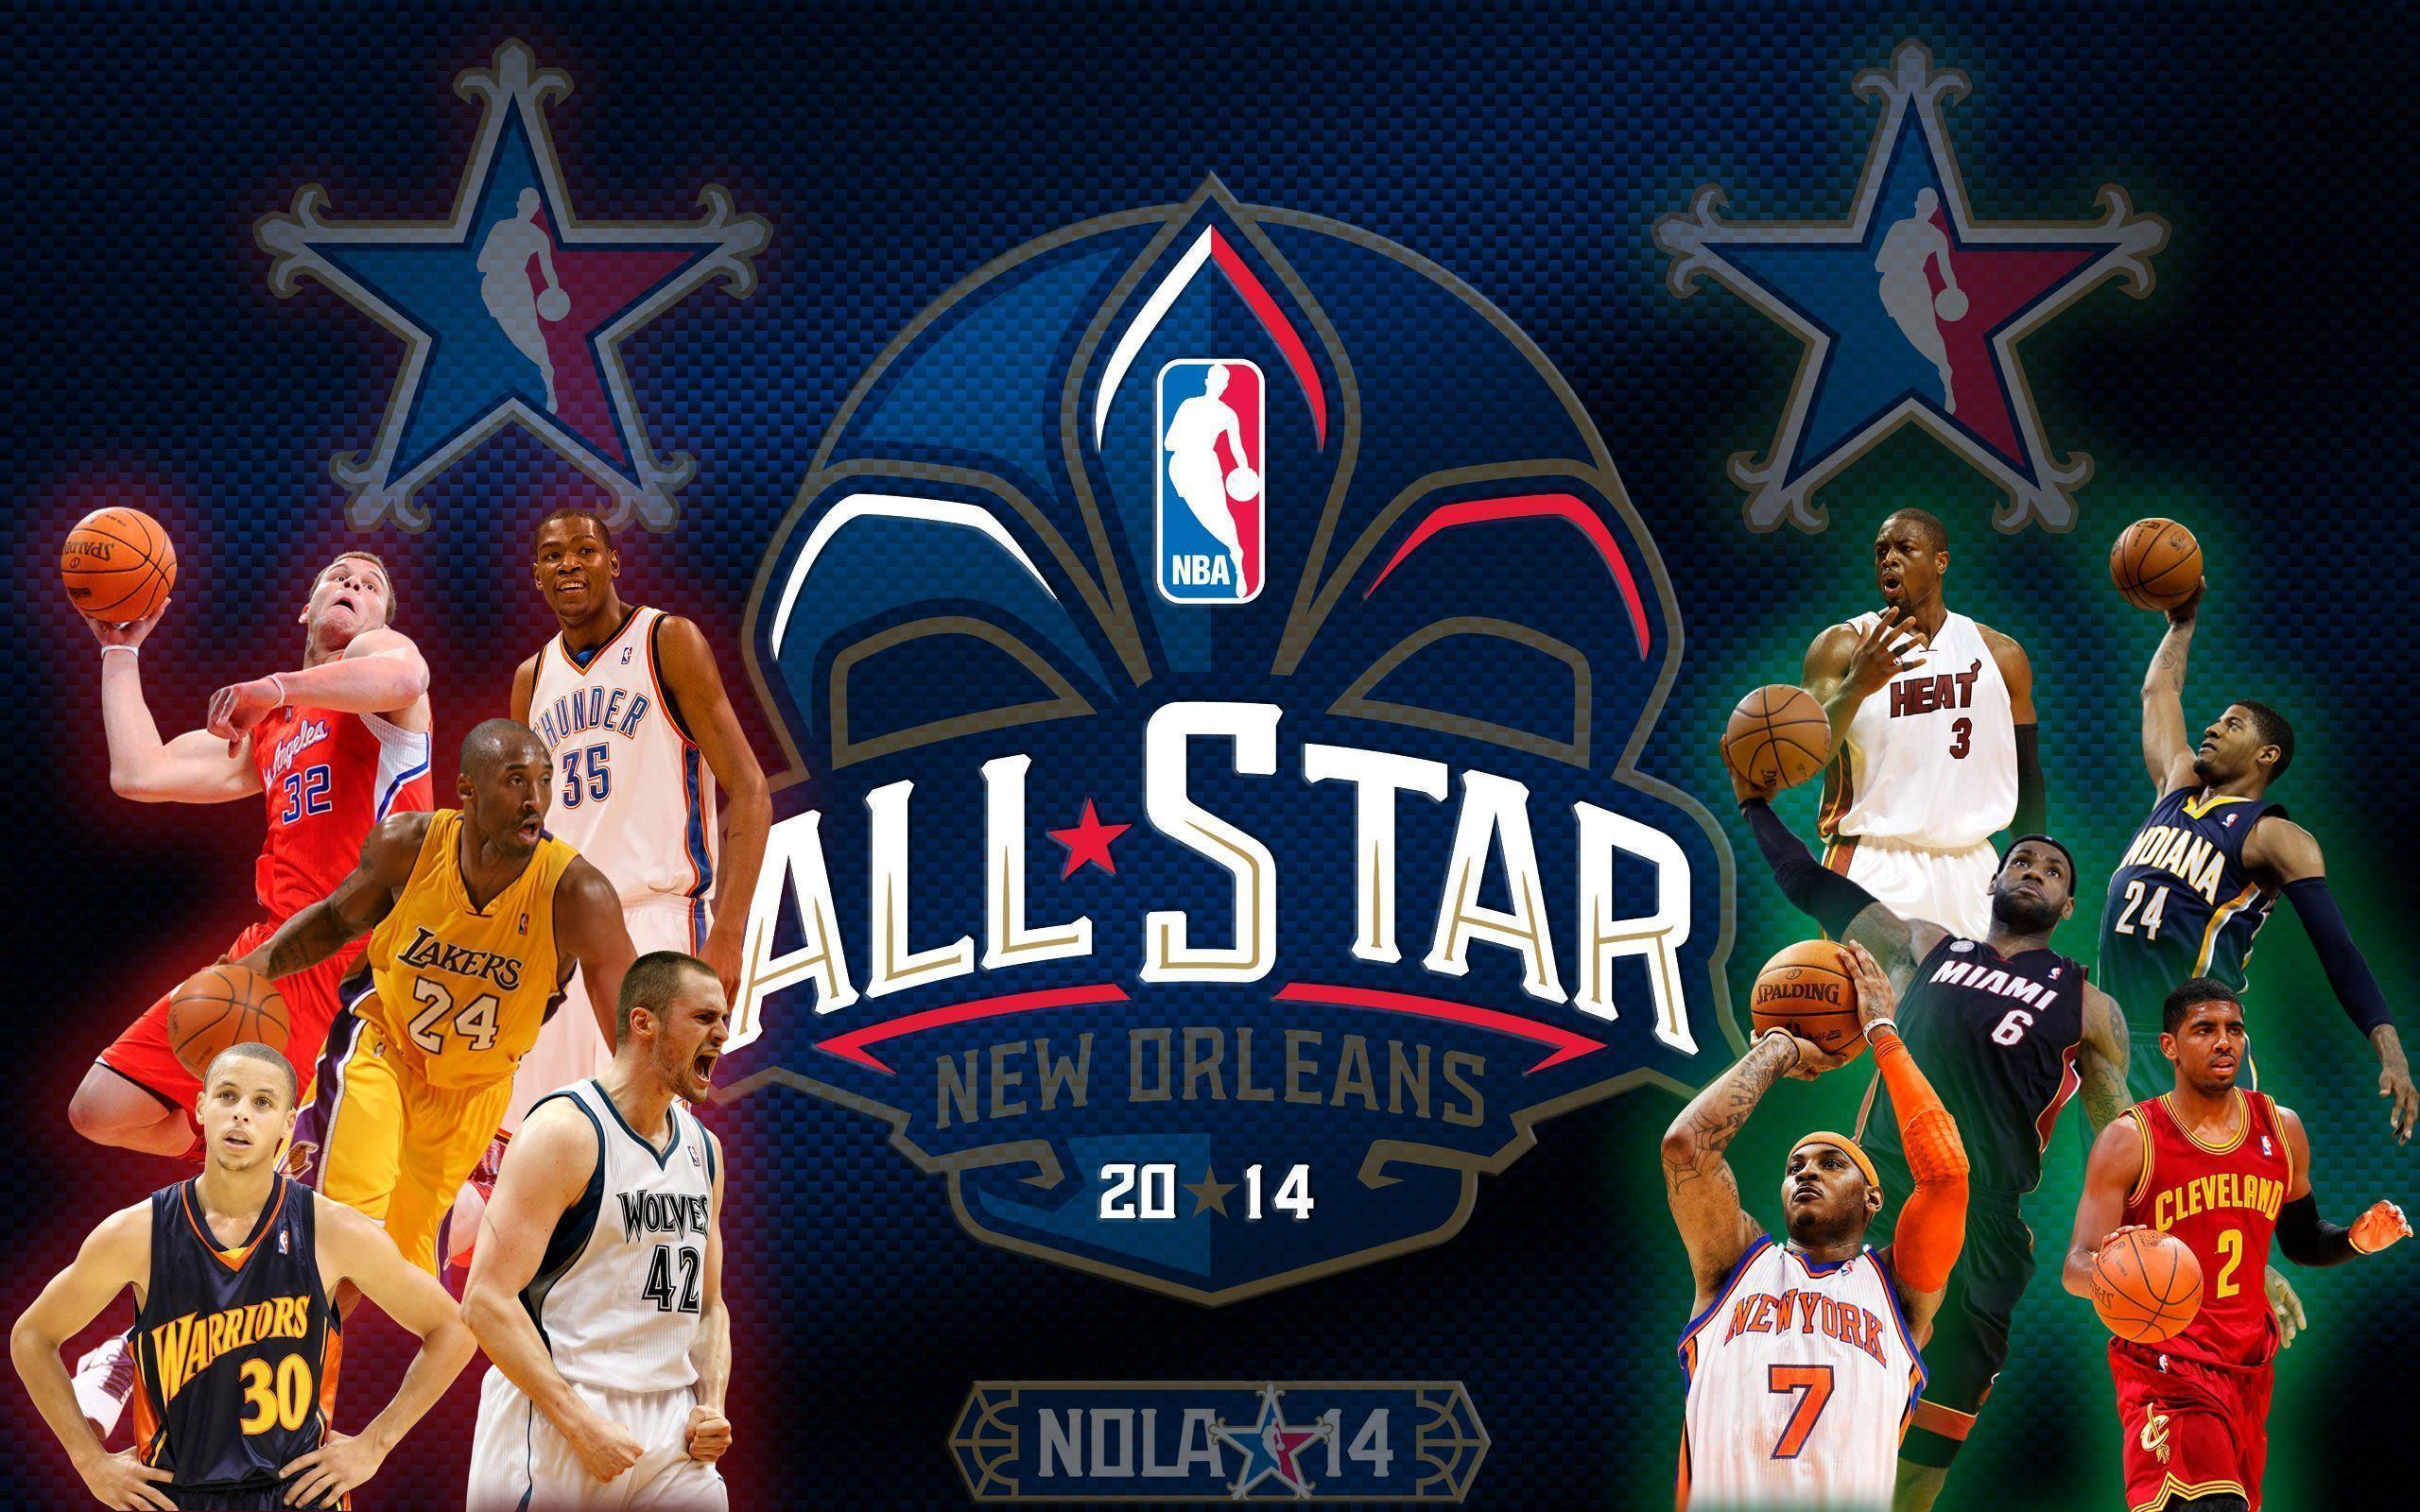 NBA All Star Game Players 2014 NOLA14 Wallpaper Wide or HD. Male